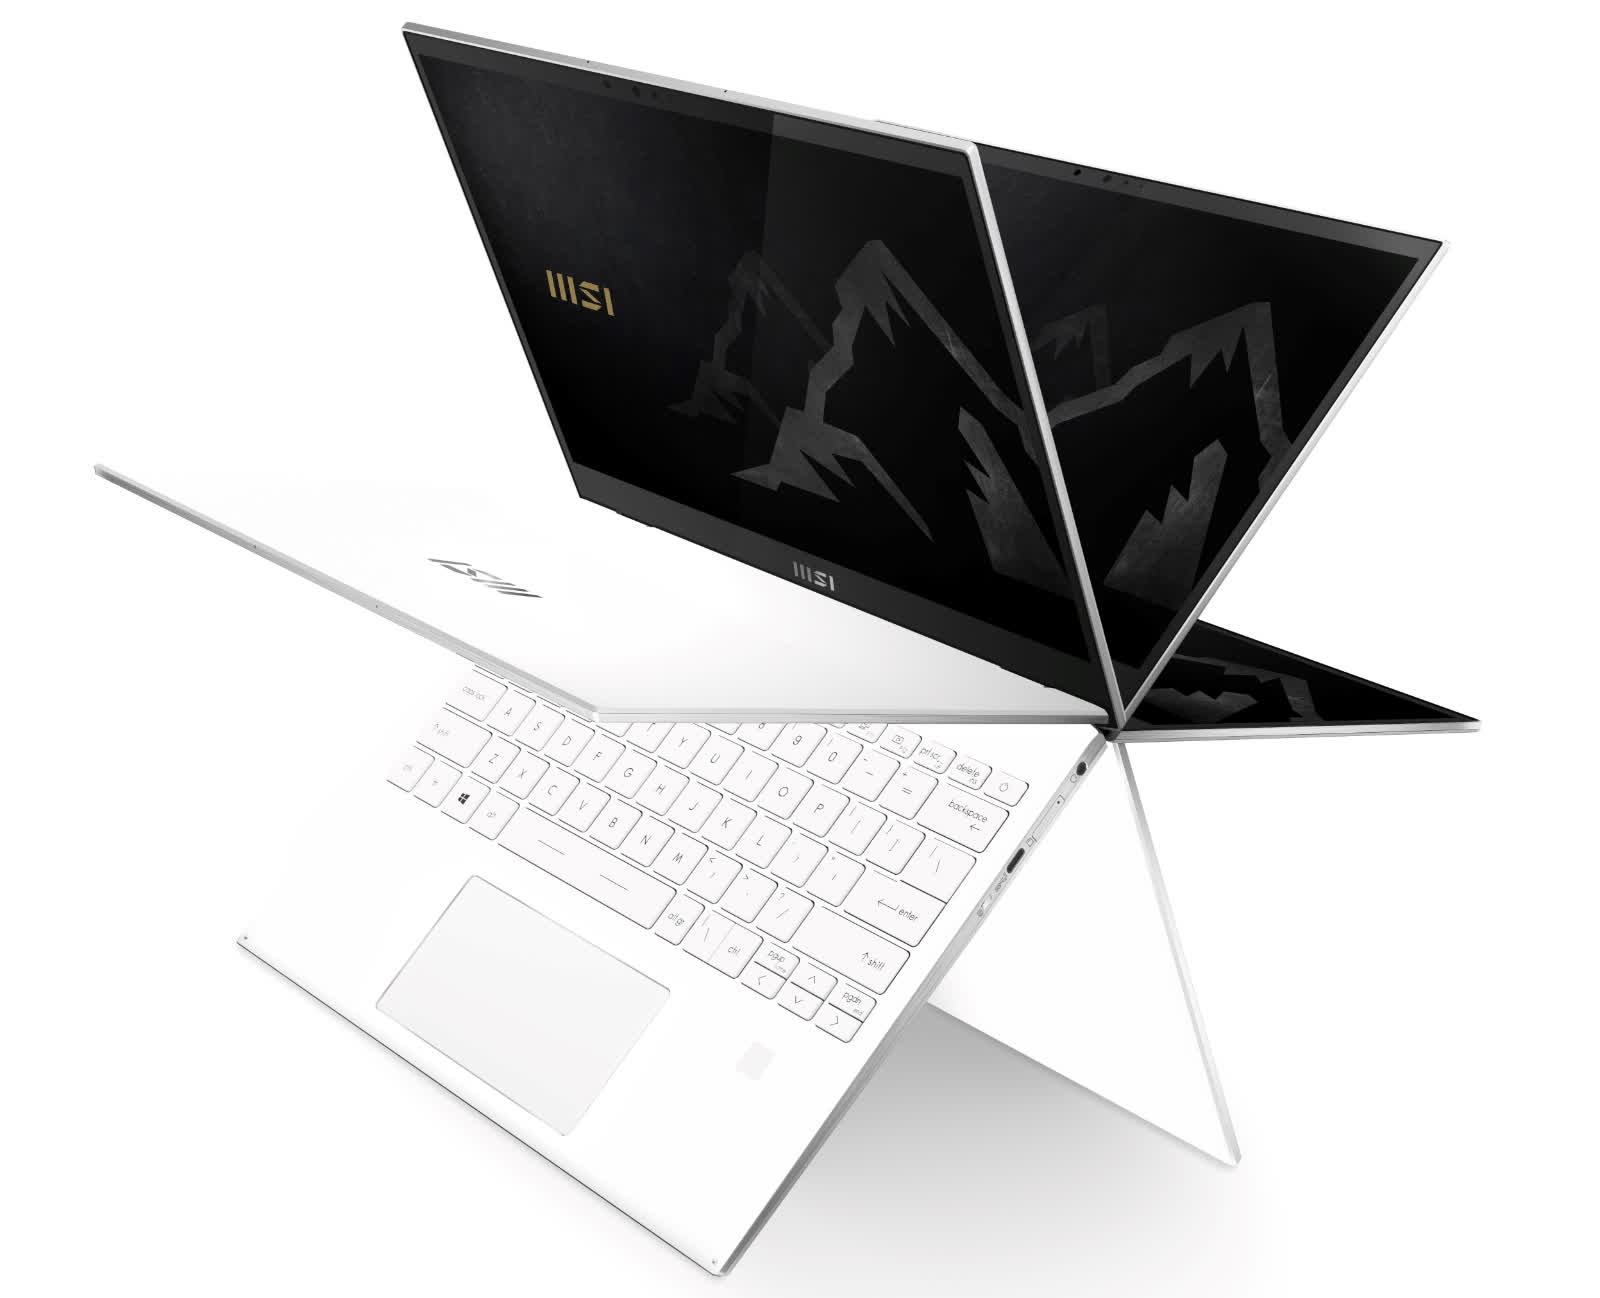 MSI targets the productivity crowd with its sleek-looking Summit E13 Flip 2-in-1